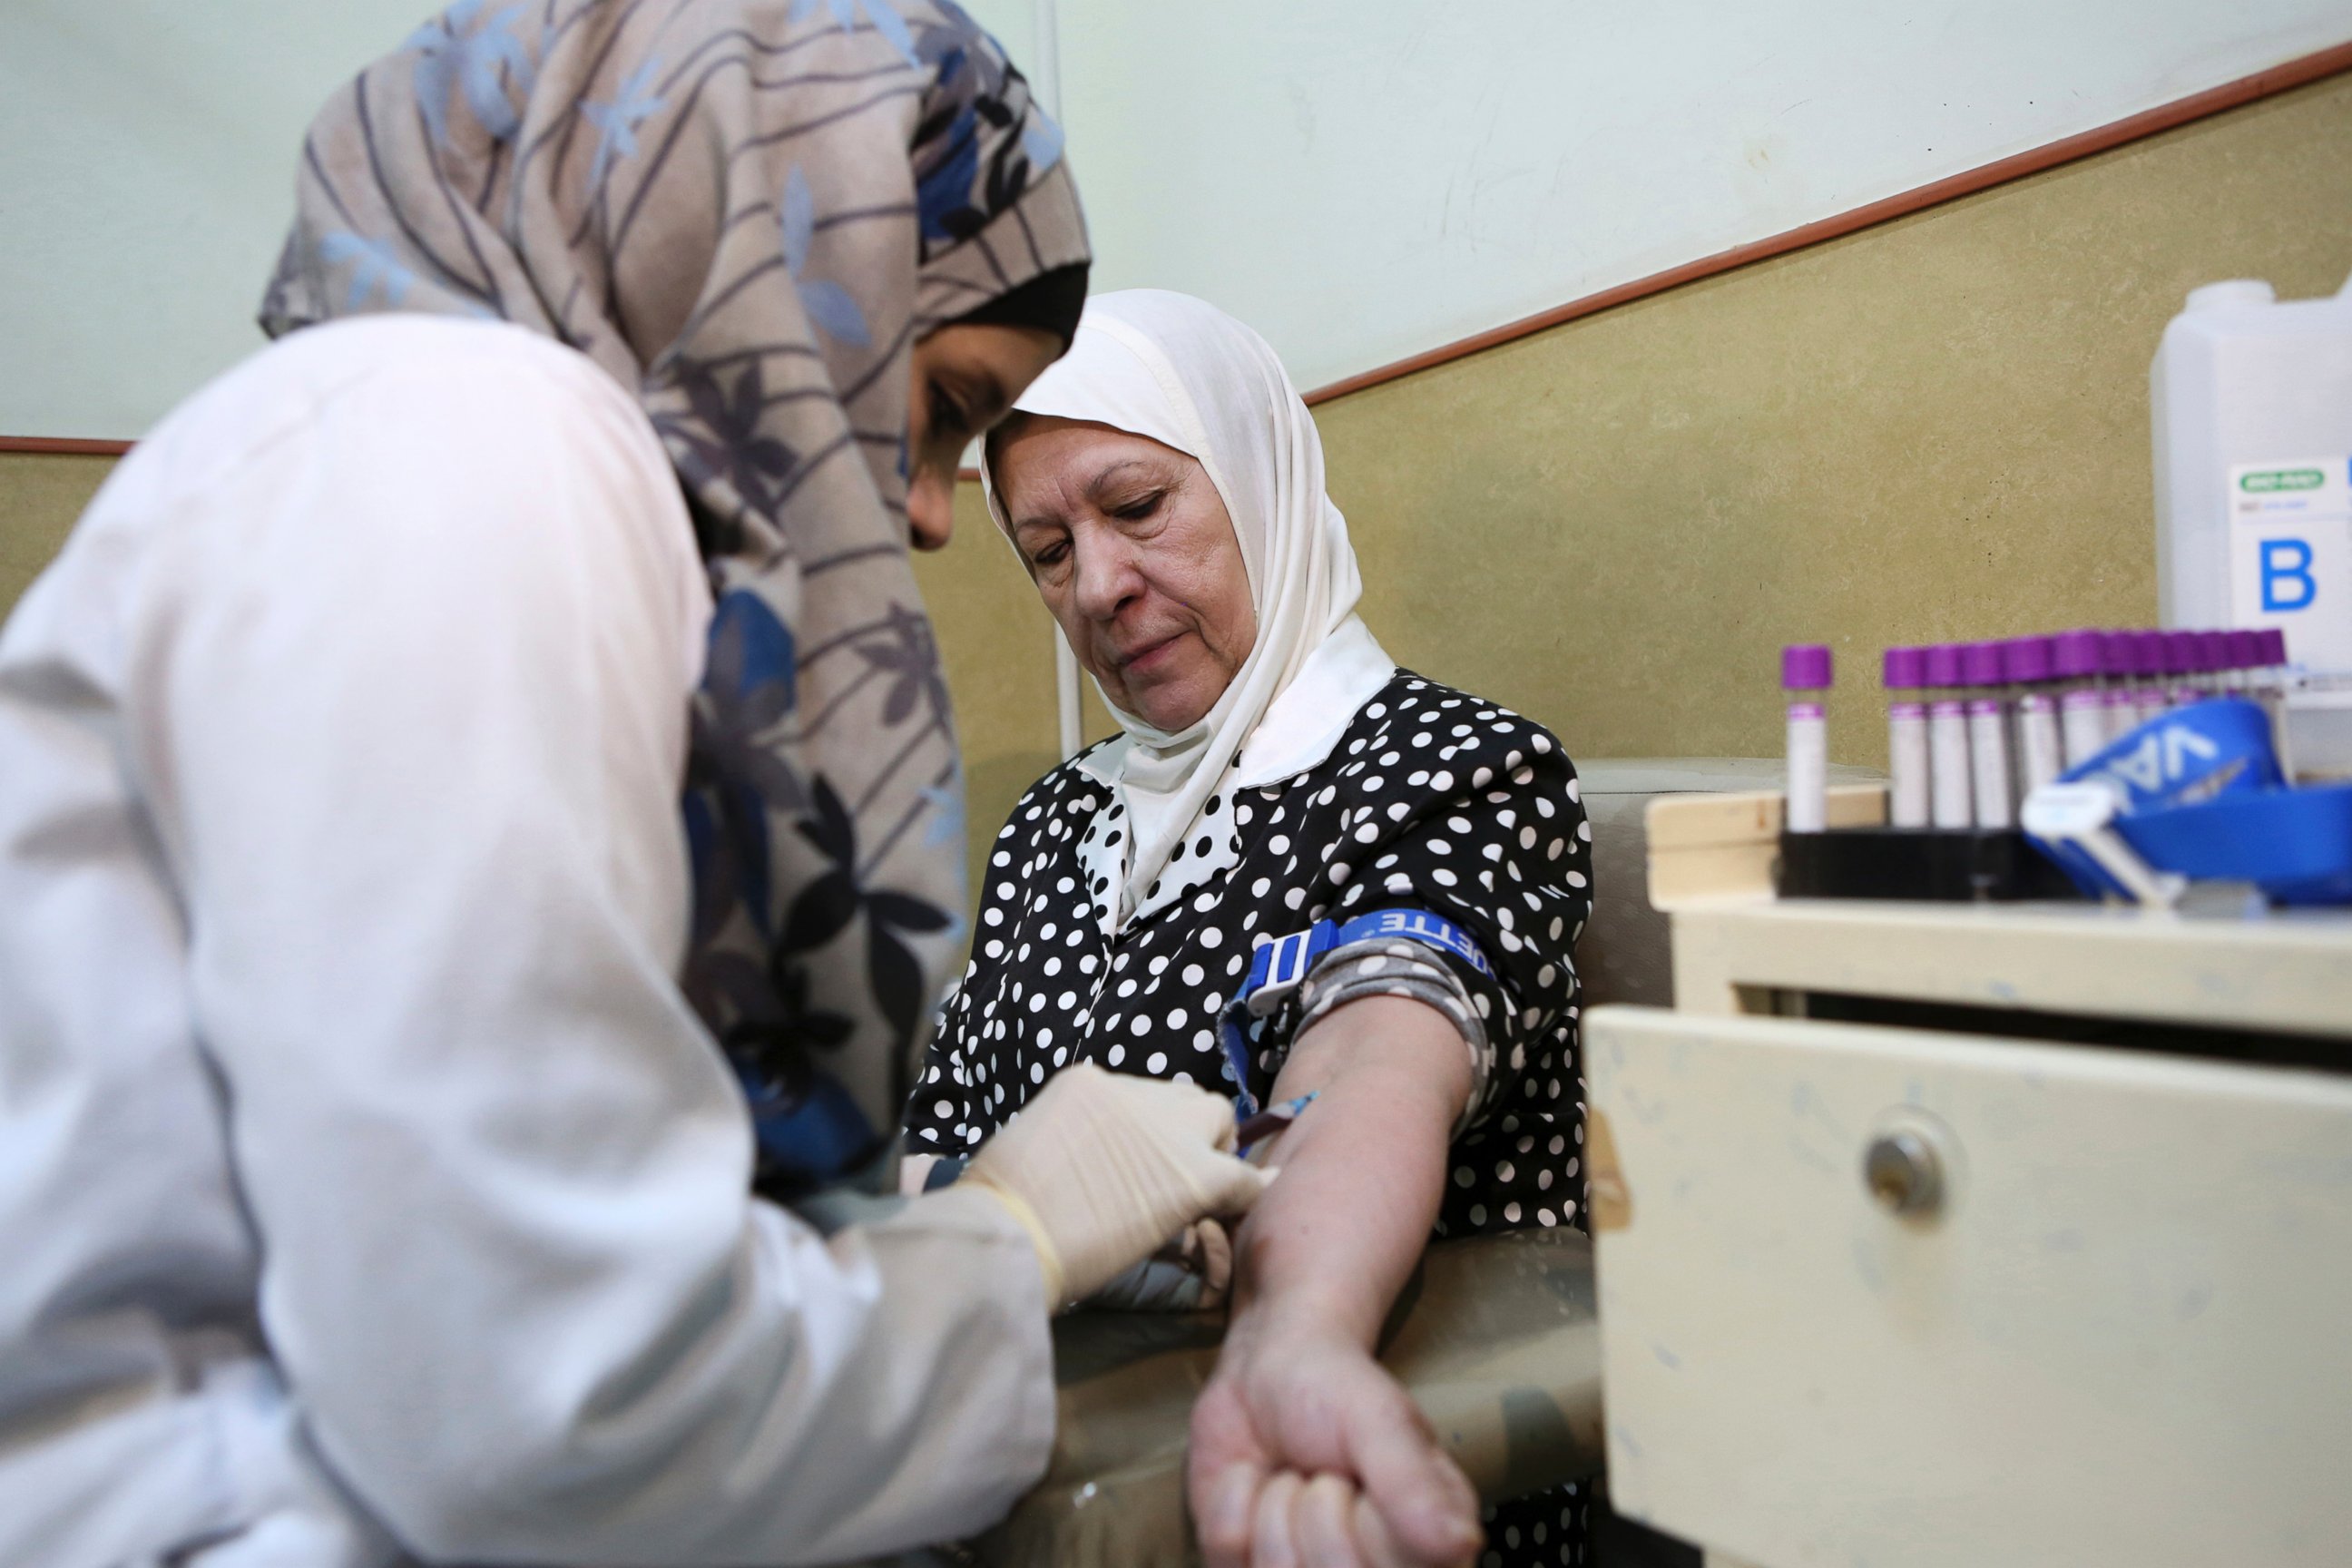 PHOTO: A nurse takes blood from a patient at Jordan's National Center for Diabetes in Amman, Jordan, June 14, 2015.